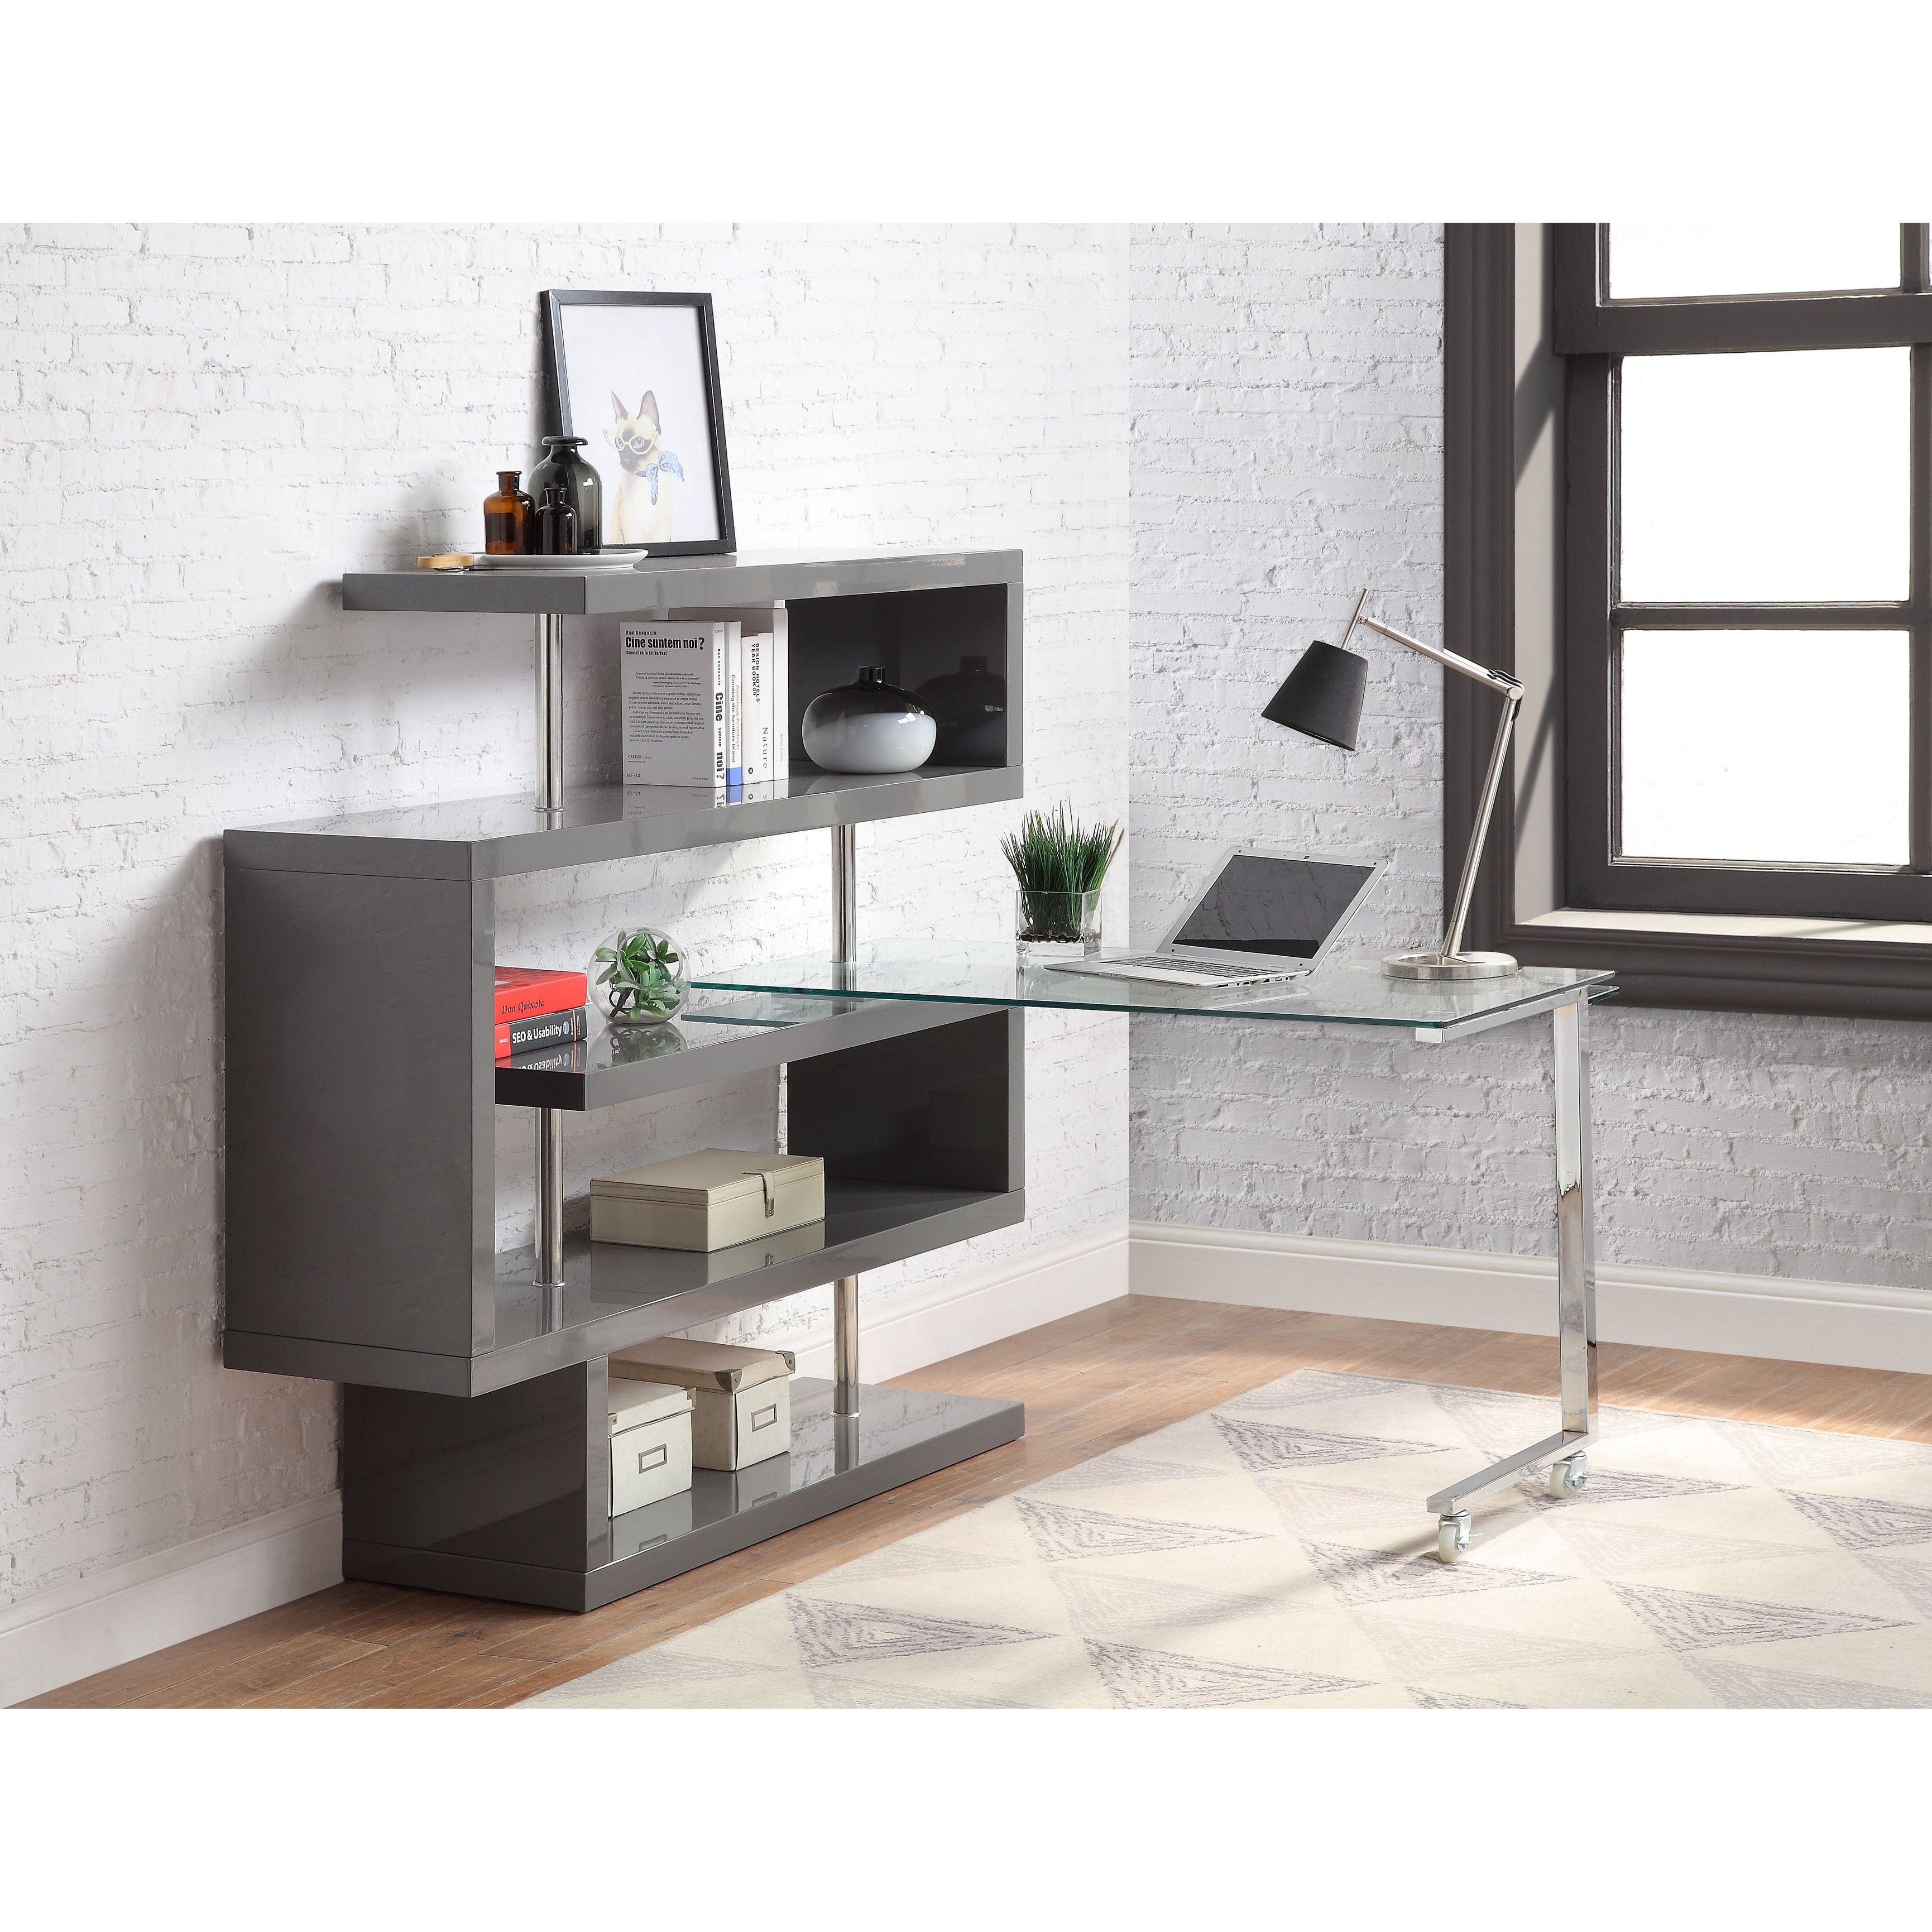 https://ak1.ostkcdn.com/images/products/is/images/direct/f65b67edb19b5814df95b9350d2c358e55a37f91/Computer-Desk-with-4-Open-Compartment%26Clear-Glass-Top%2C-Grey-%26-Chrome.jpg